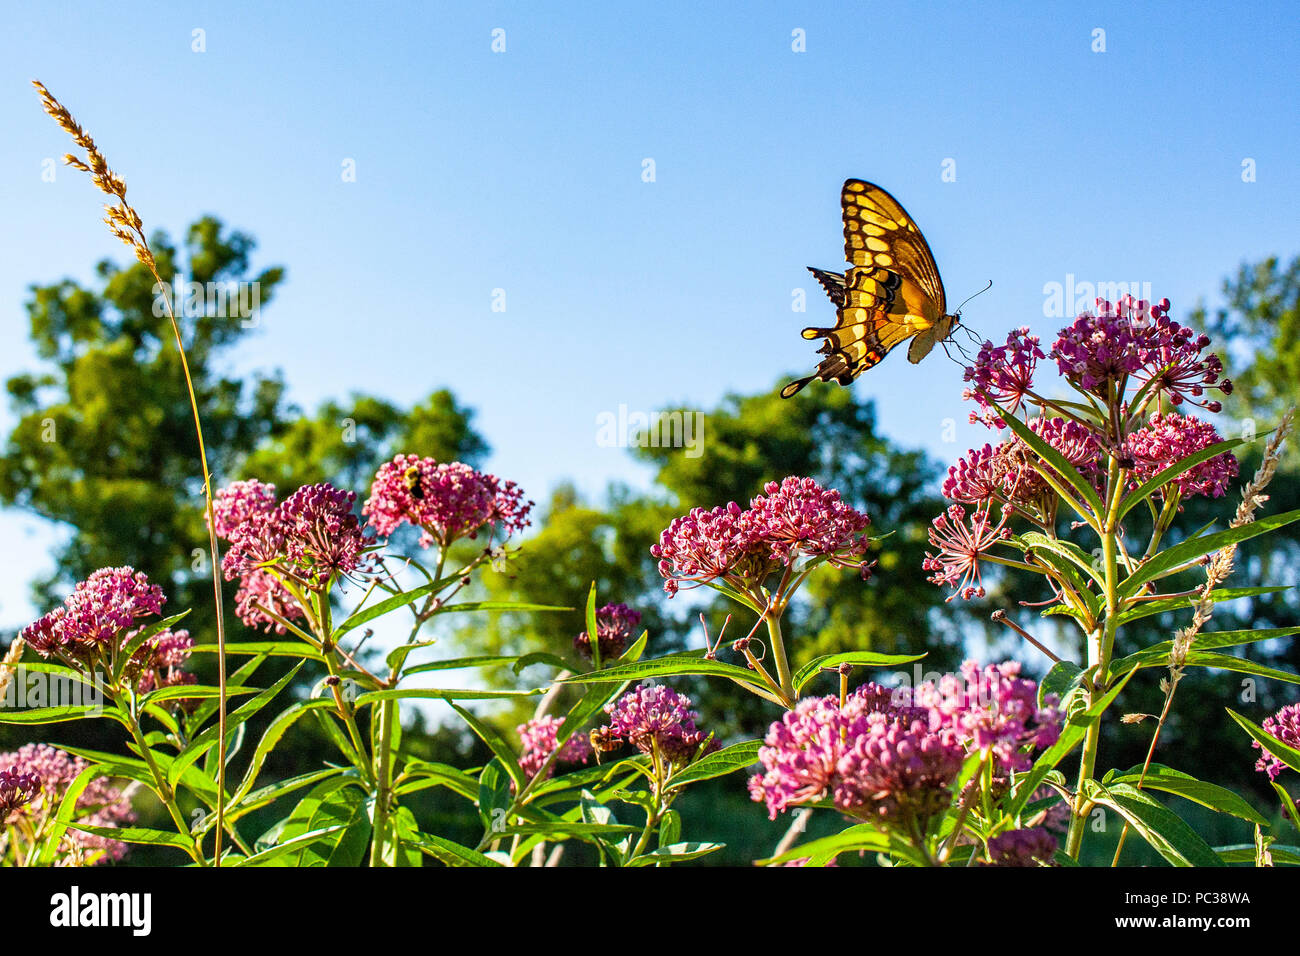 A giant swallowtail butterfly eating nectar from a swamp milkweed on a sunny clear day. Stock Photo